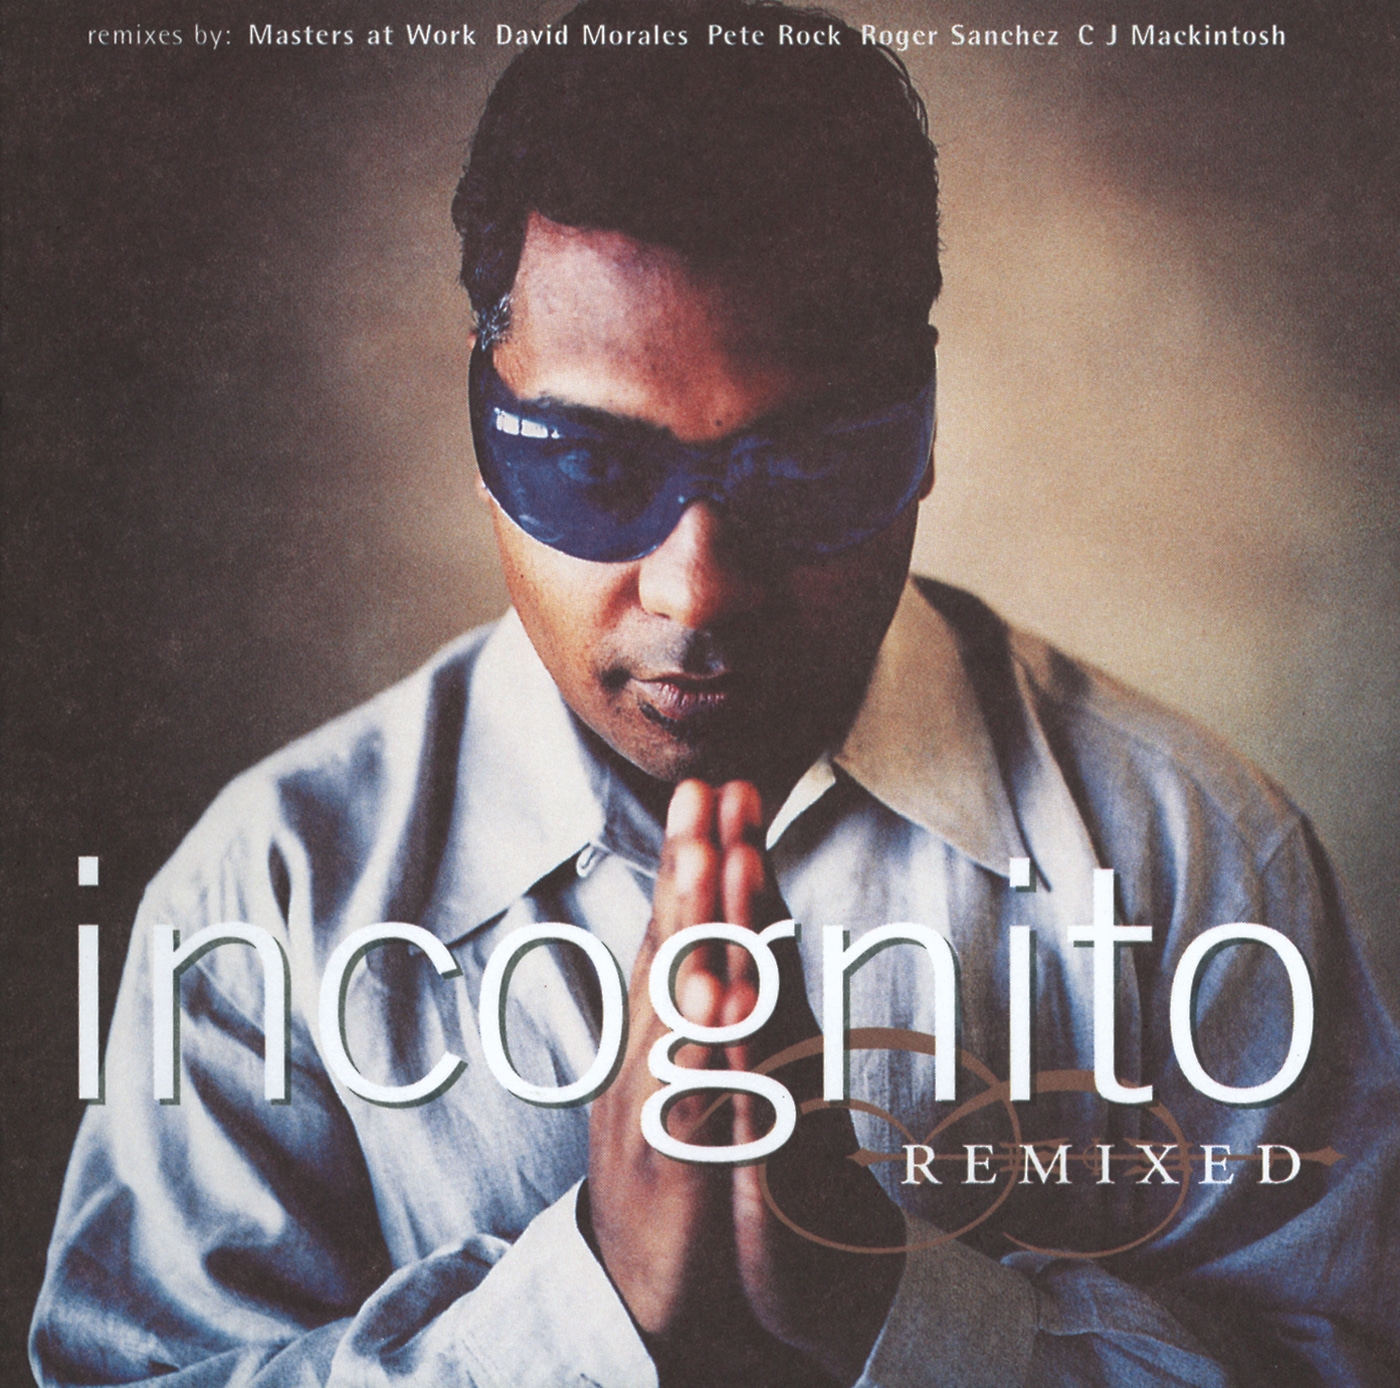 Incognito-Roots (Pete Rock Remix)